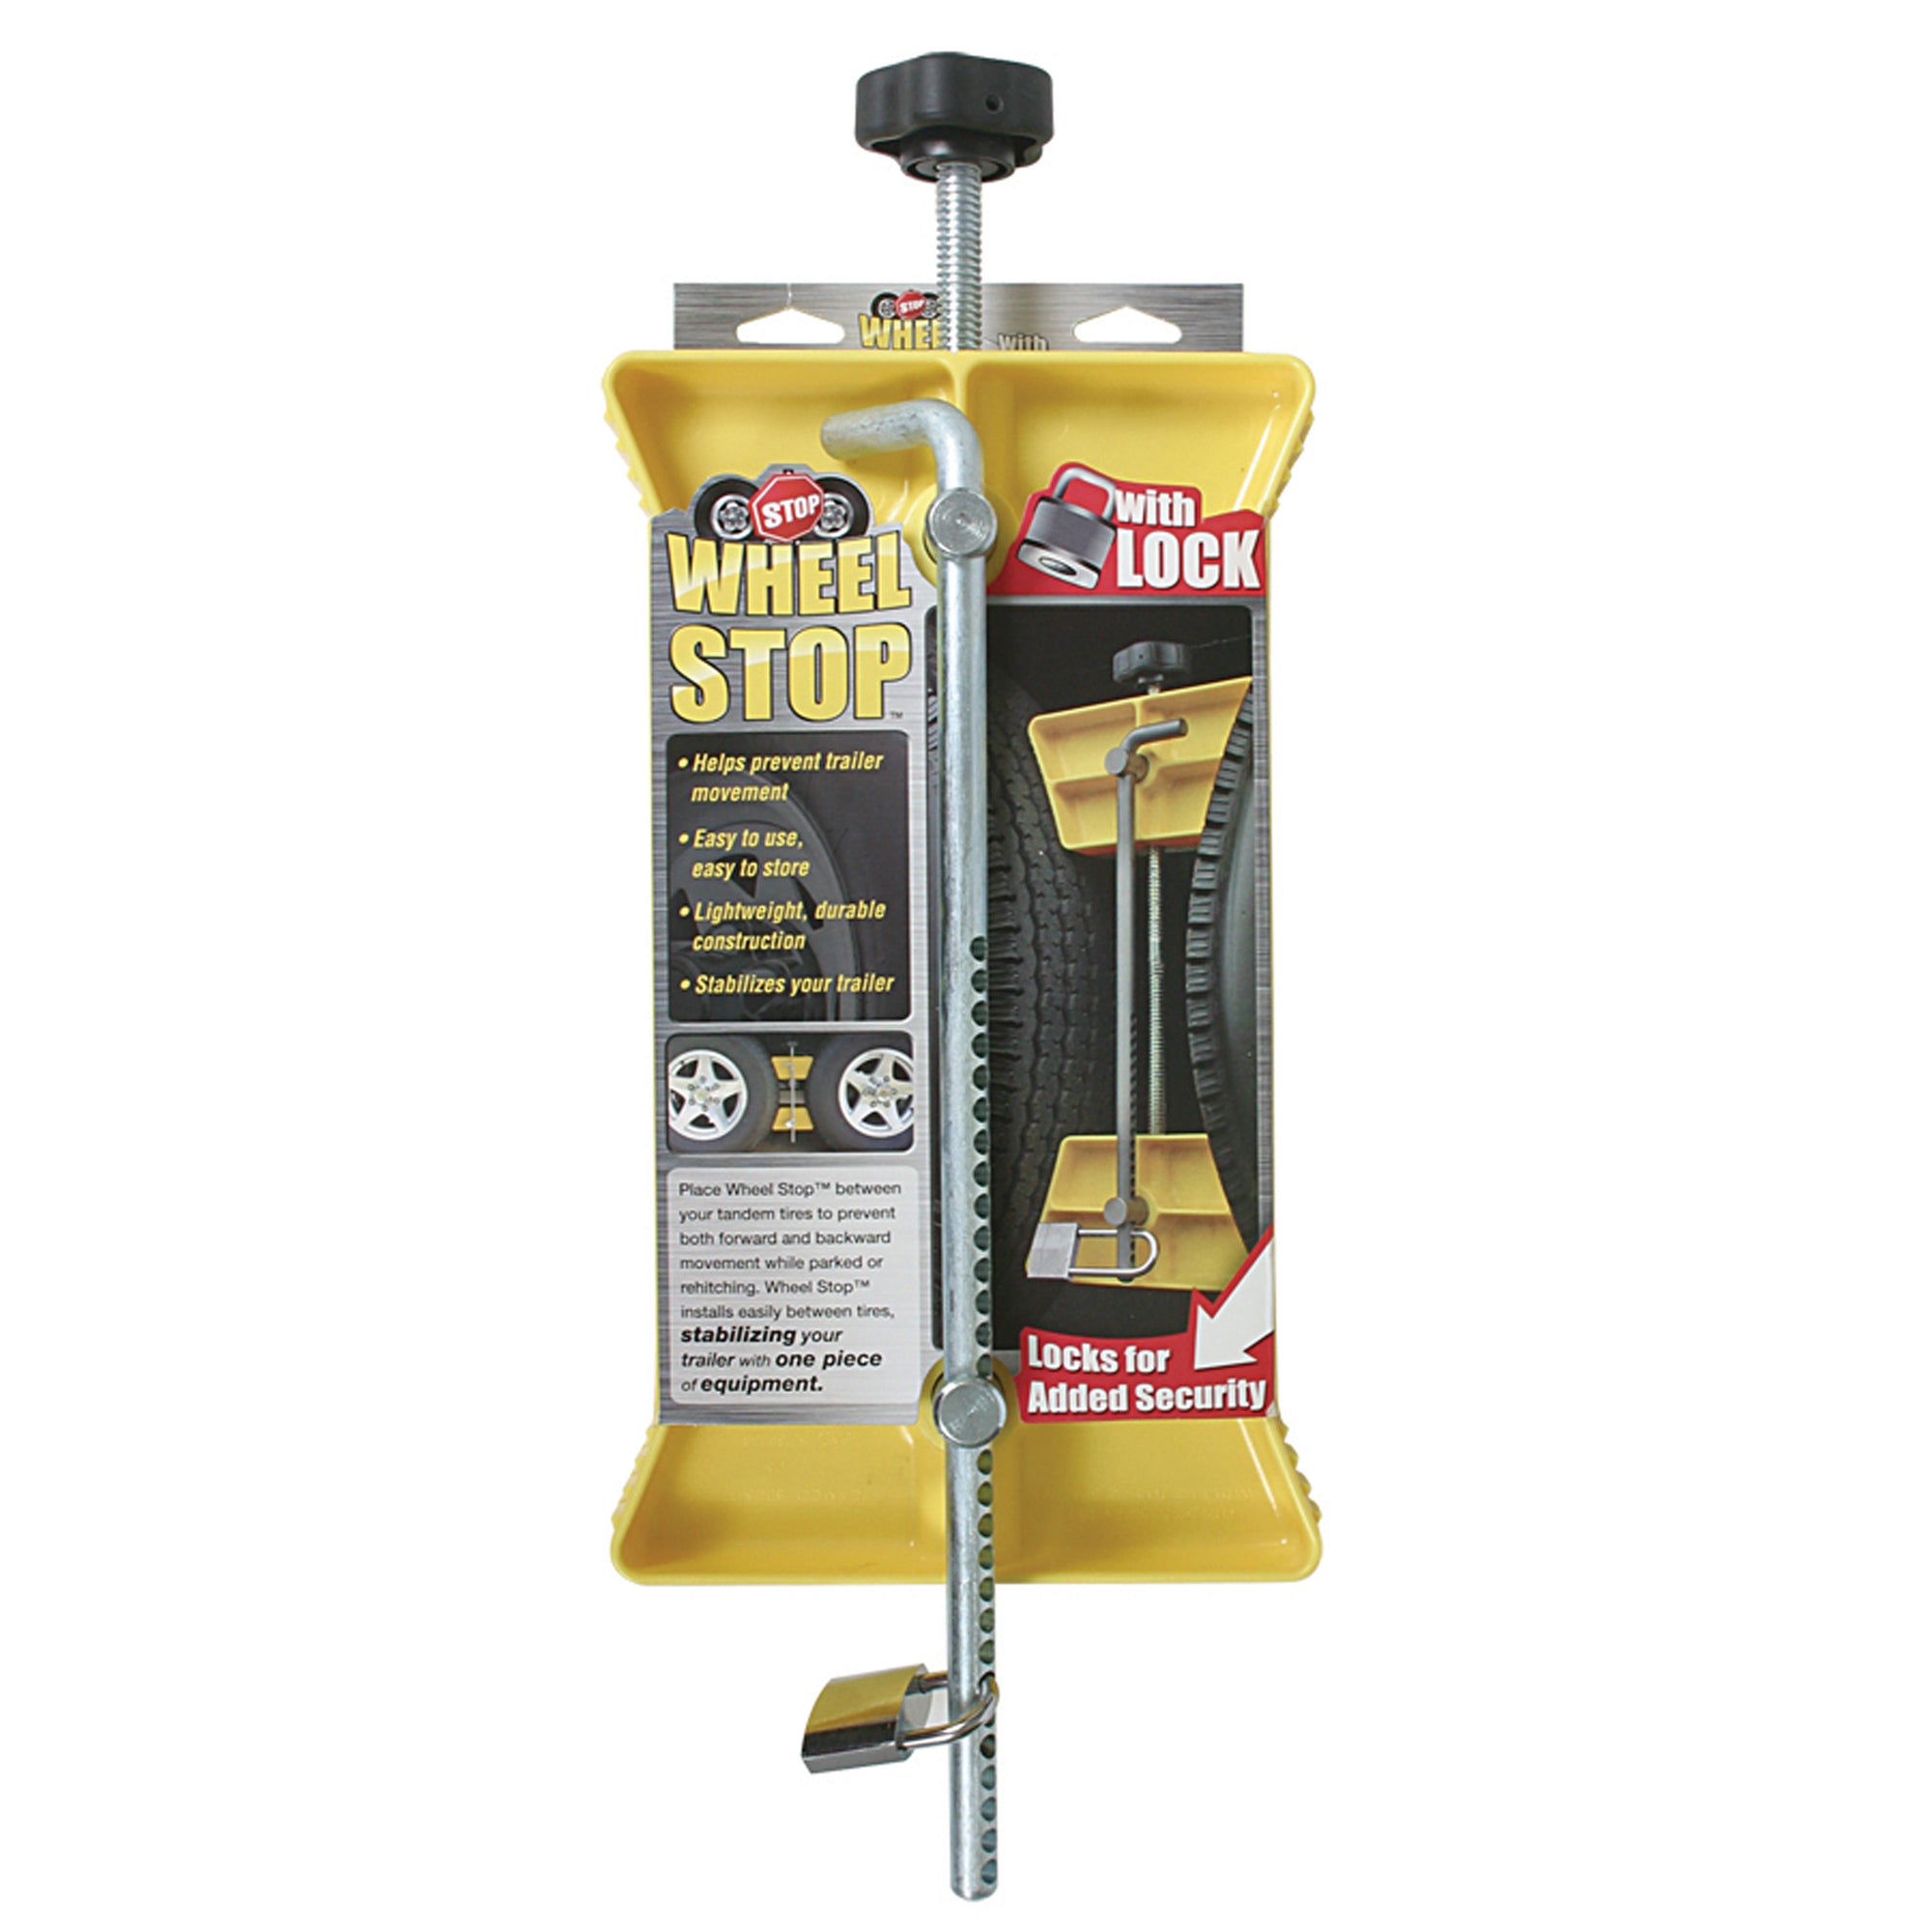 Camco 44642 Wheel Stop - Large with Lock